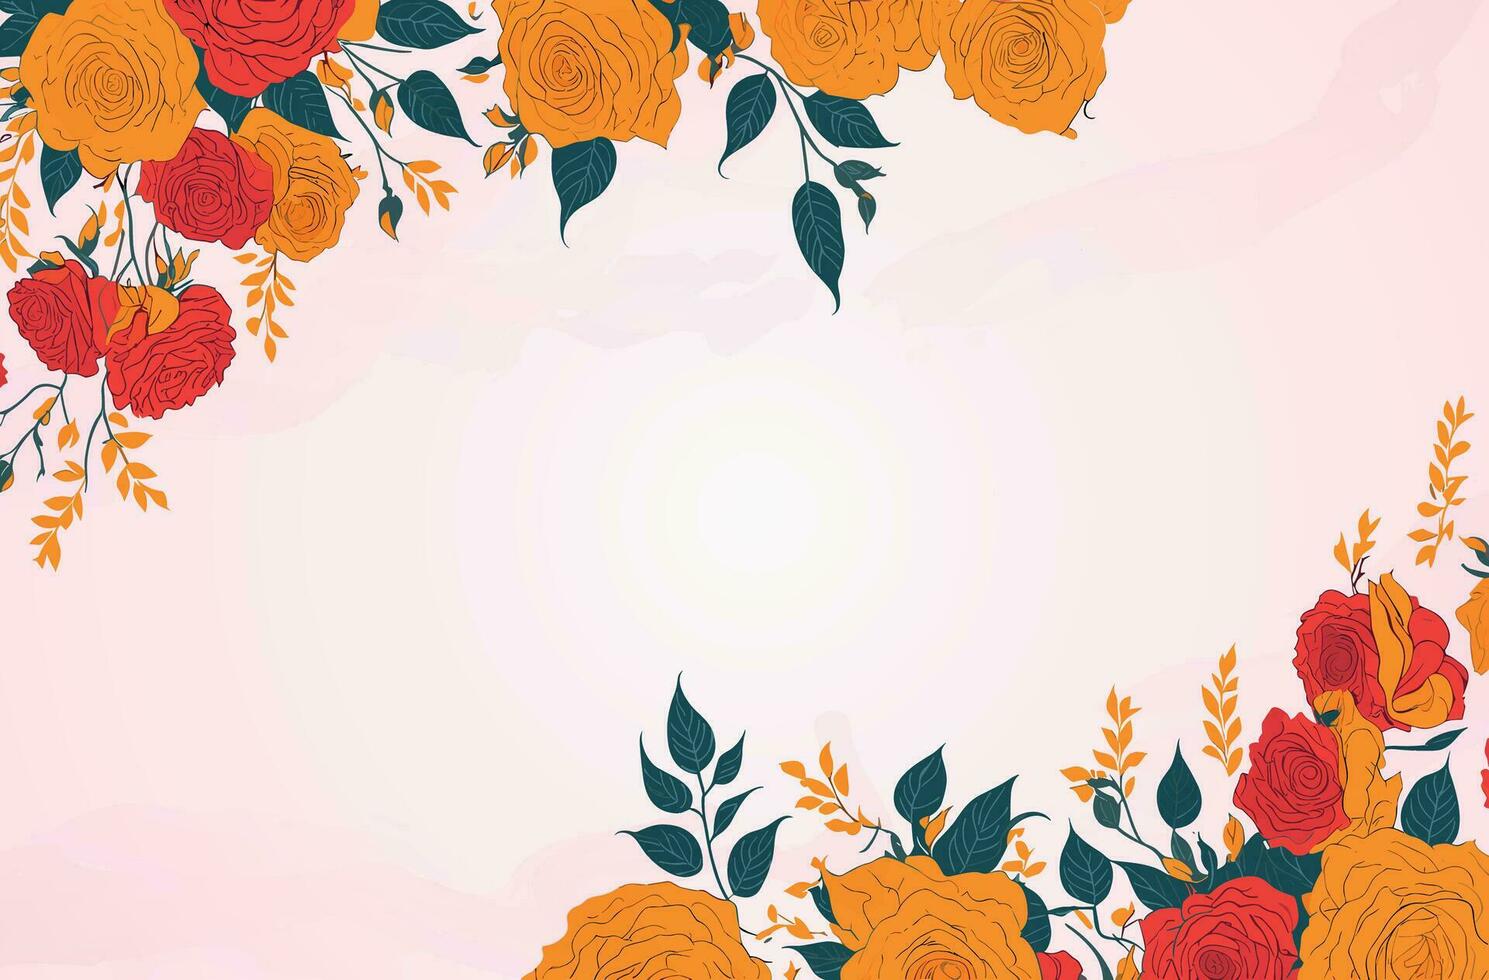 Watercolor Floral Background Design, With Flowers and Leaves and Branches vector